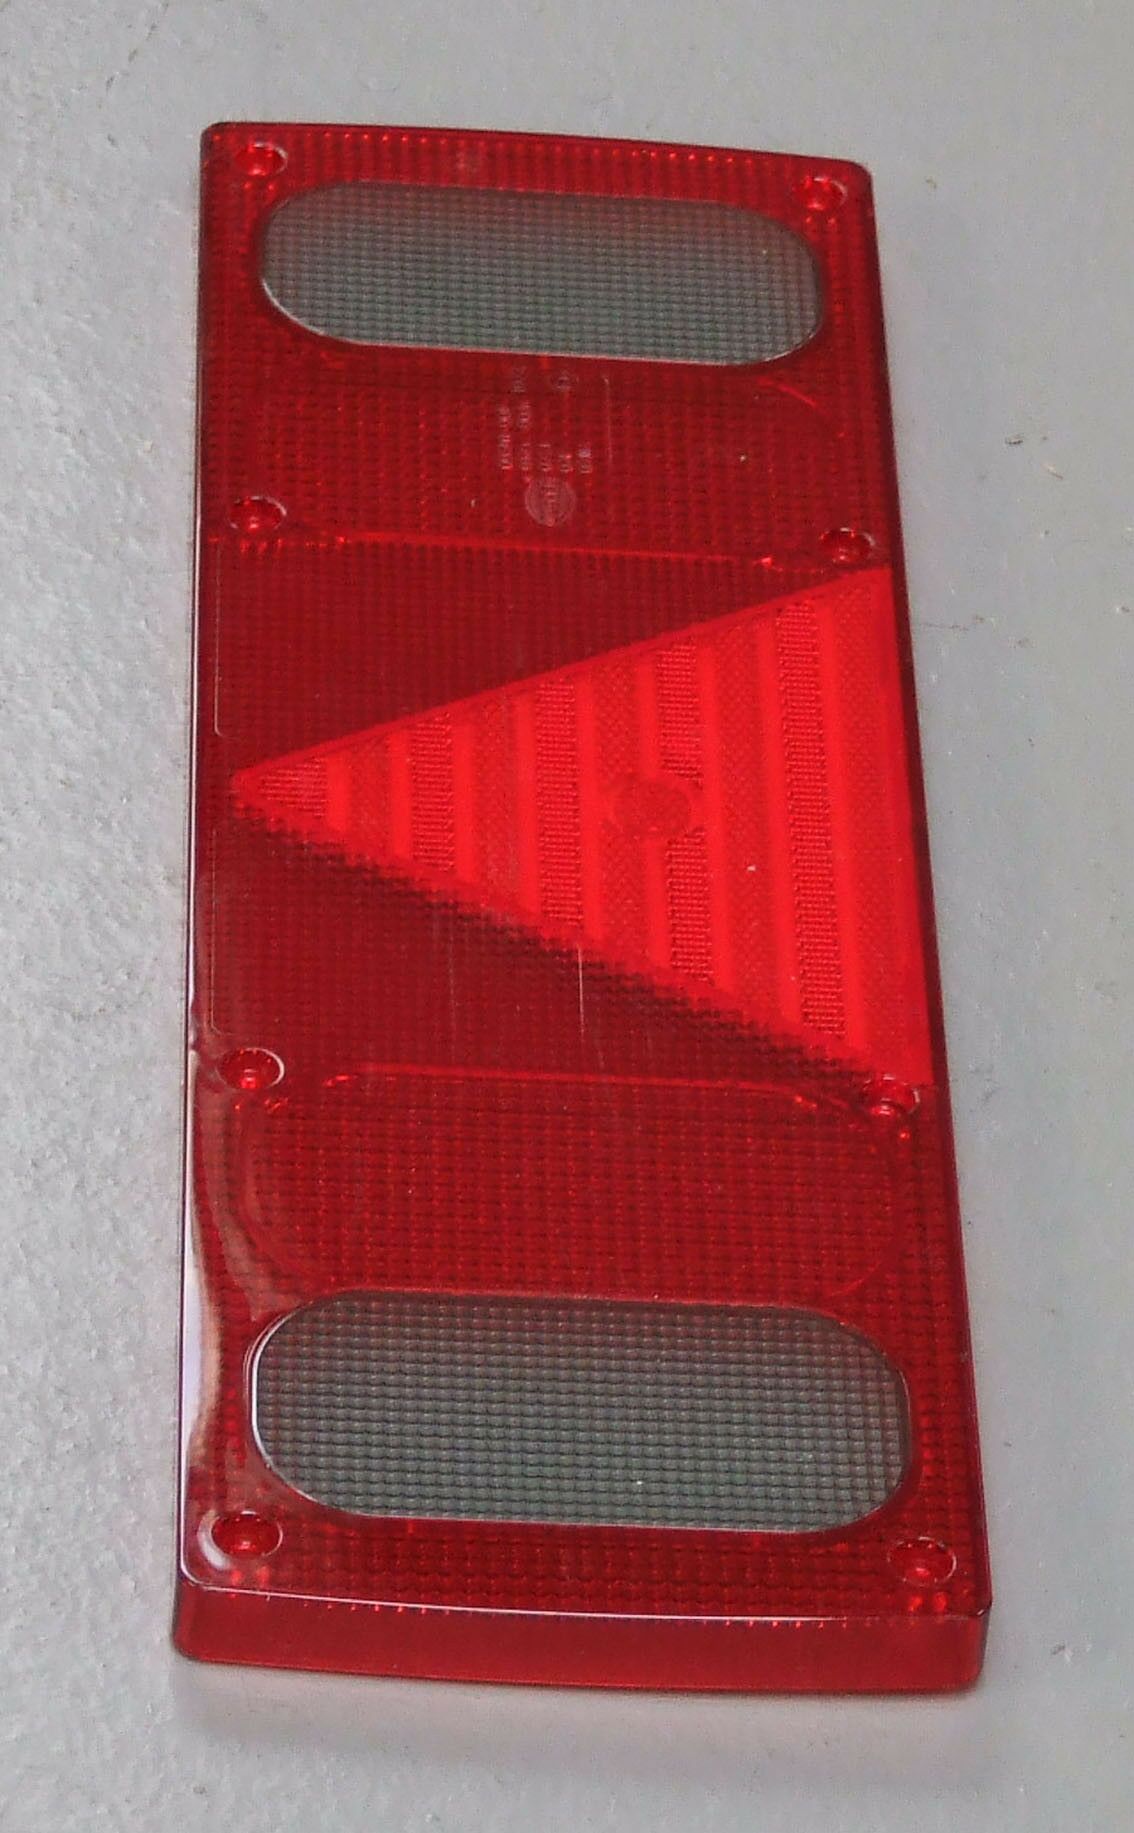 Staklo stop lampe 440x148 led l/d